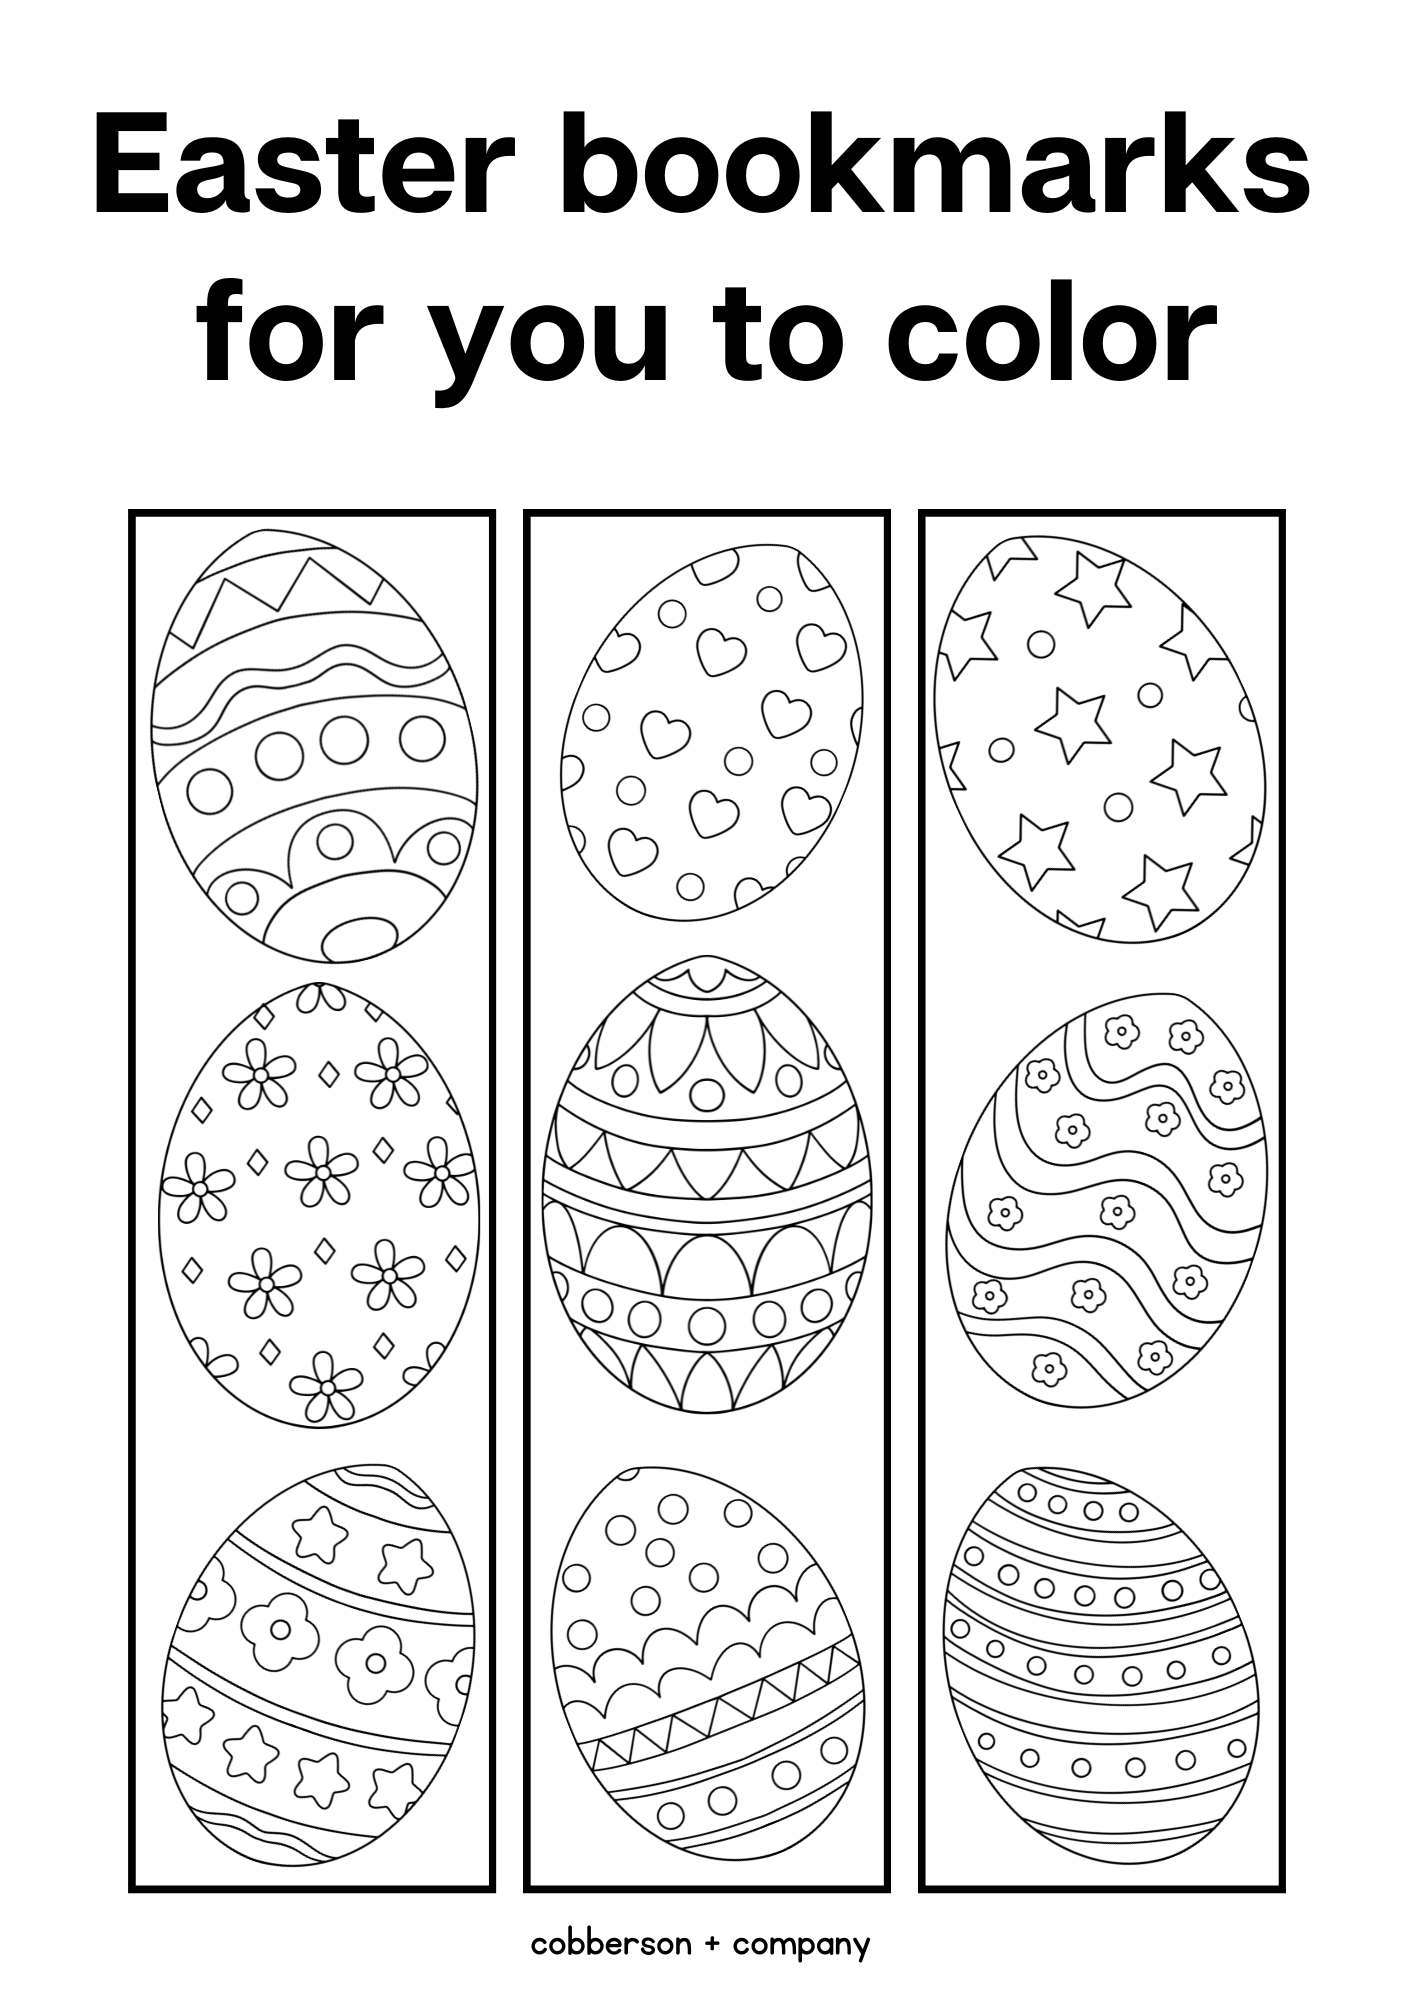 Free printable easter coloring bookmarks